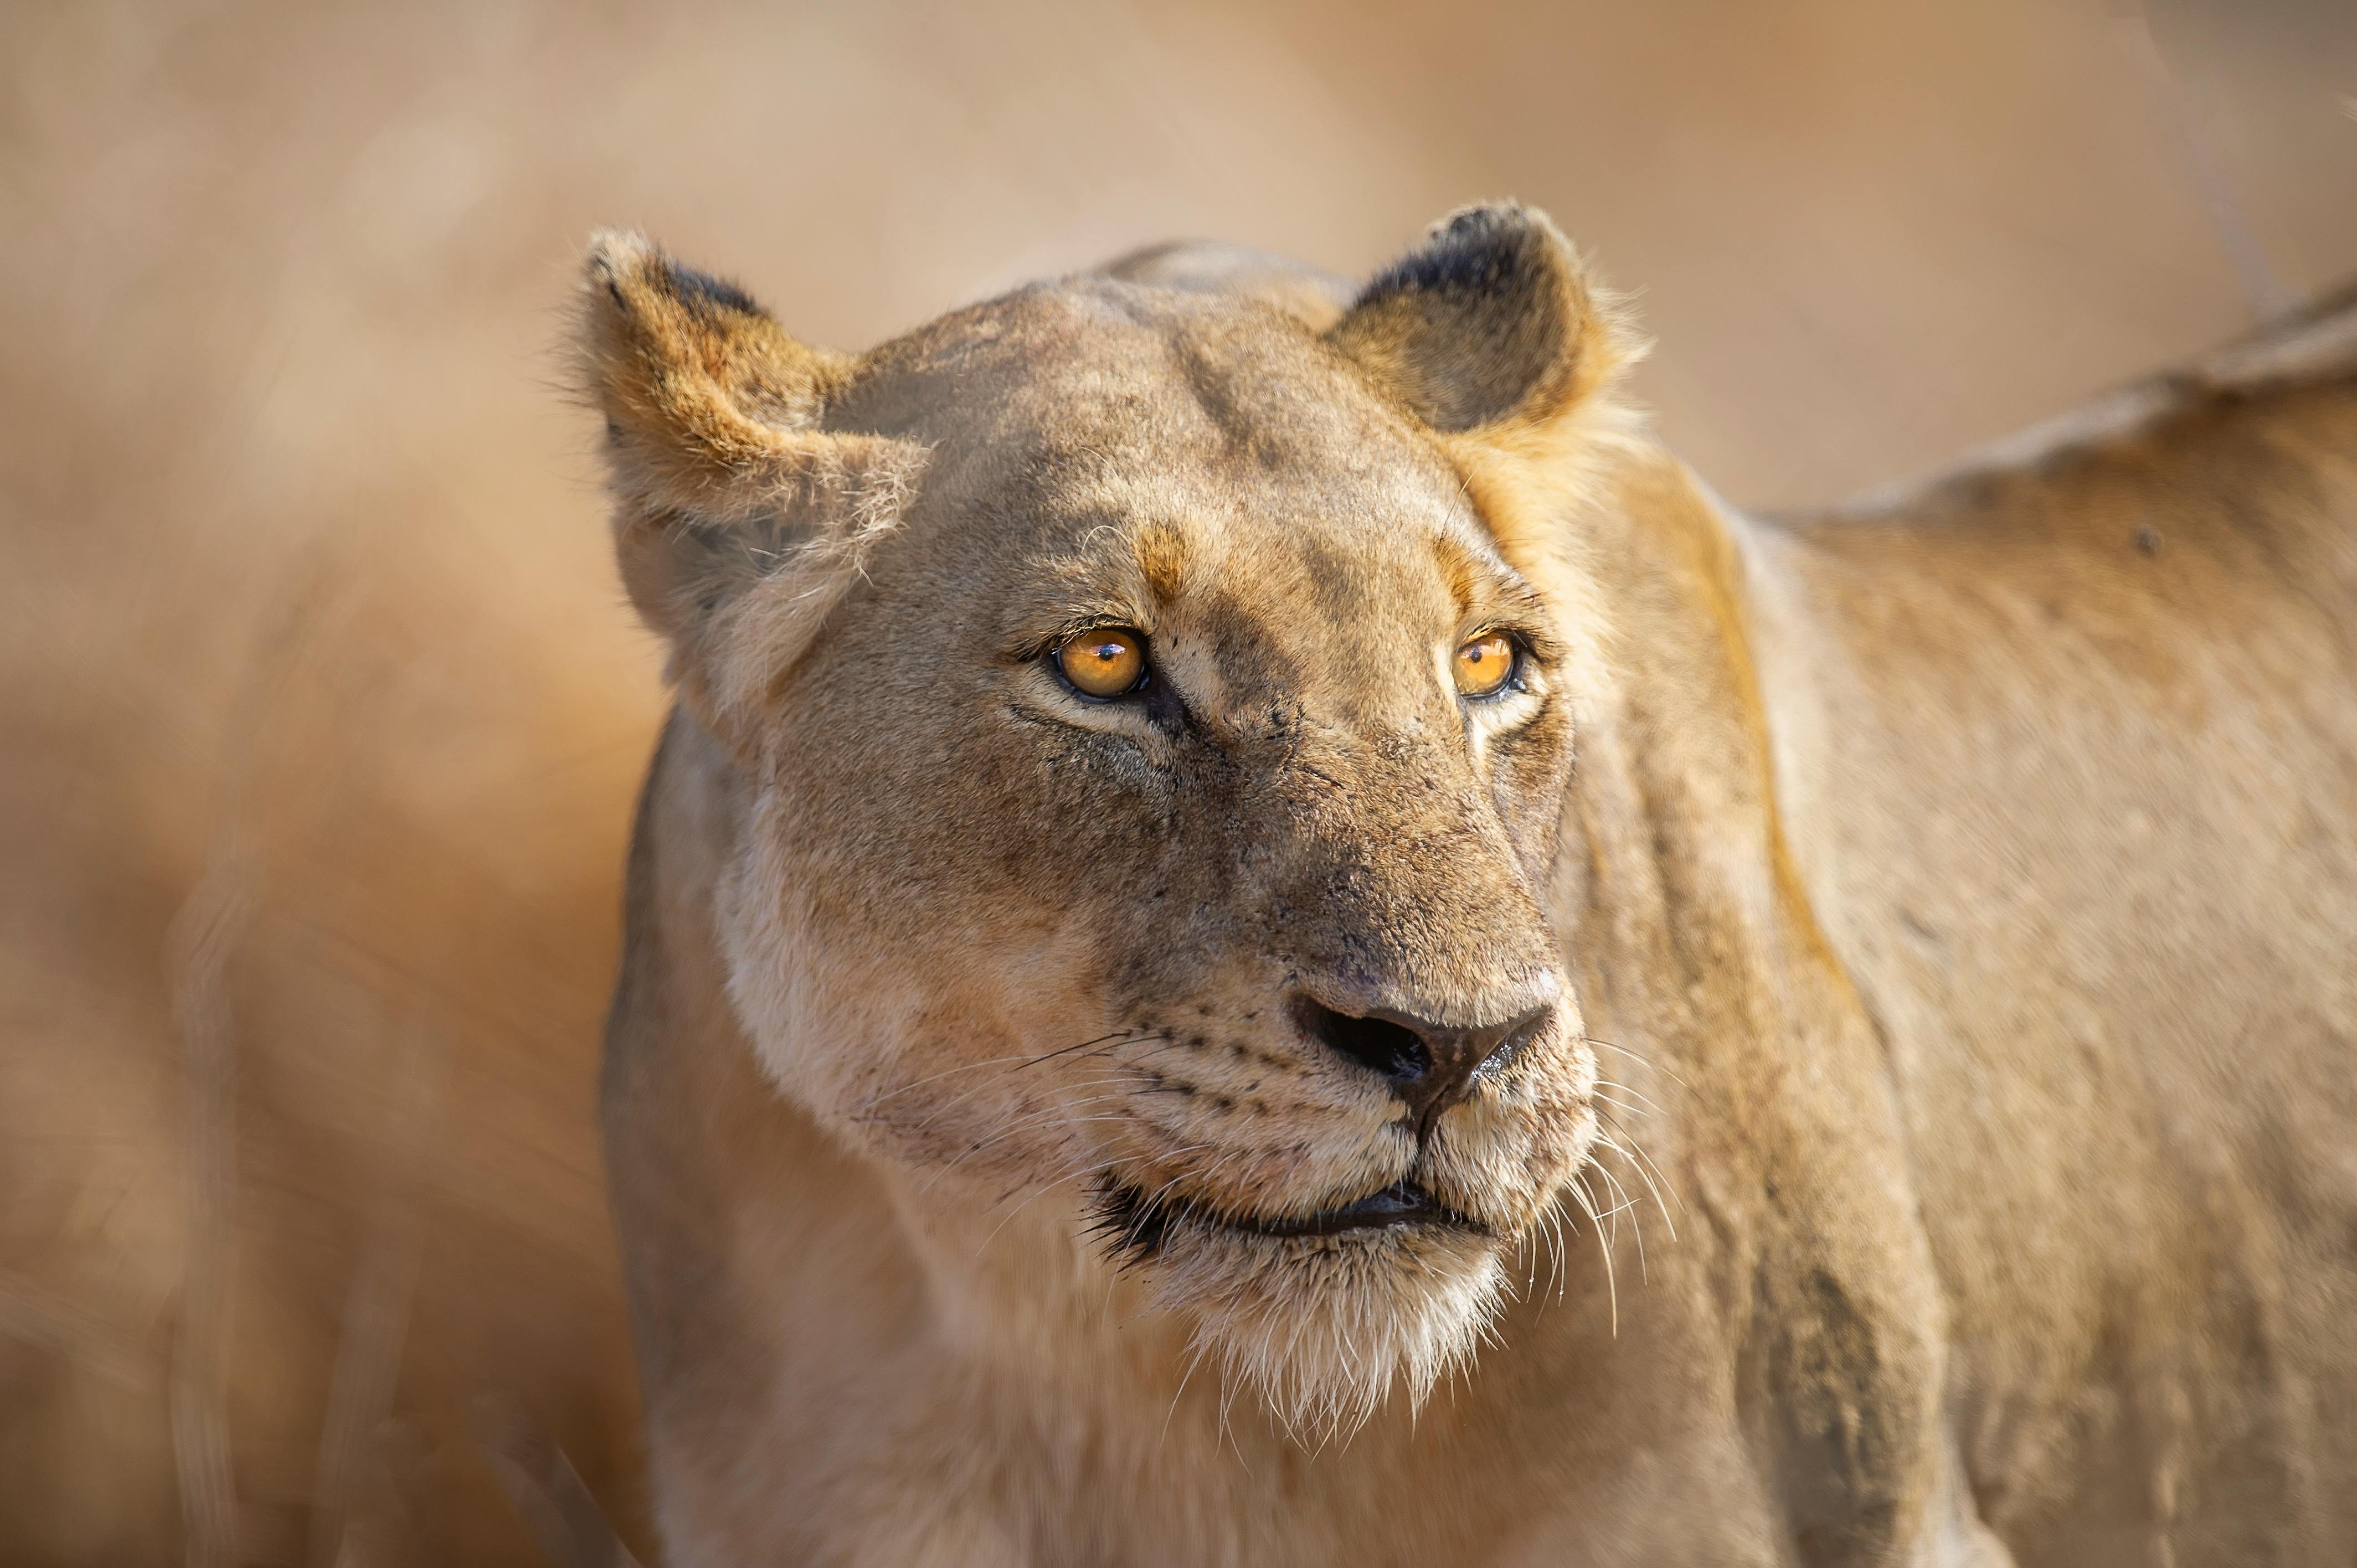 a lioness in close up photo